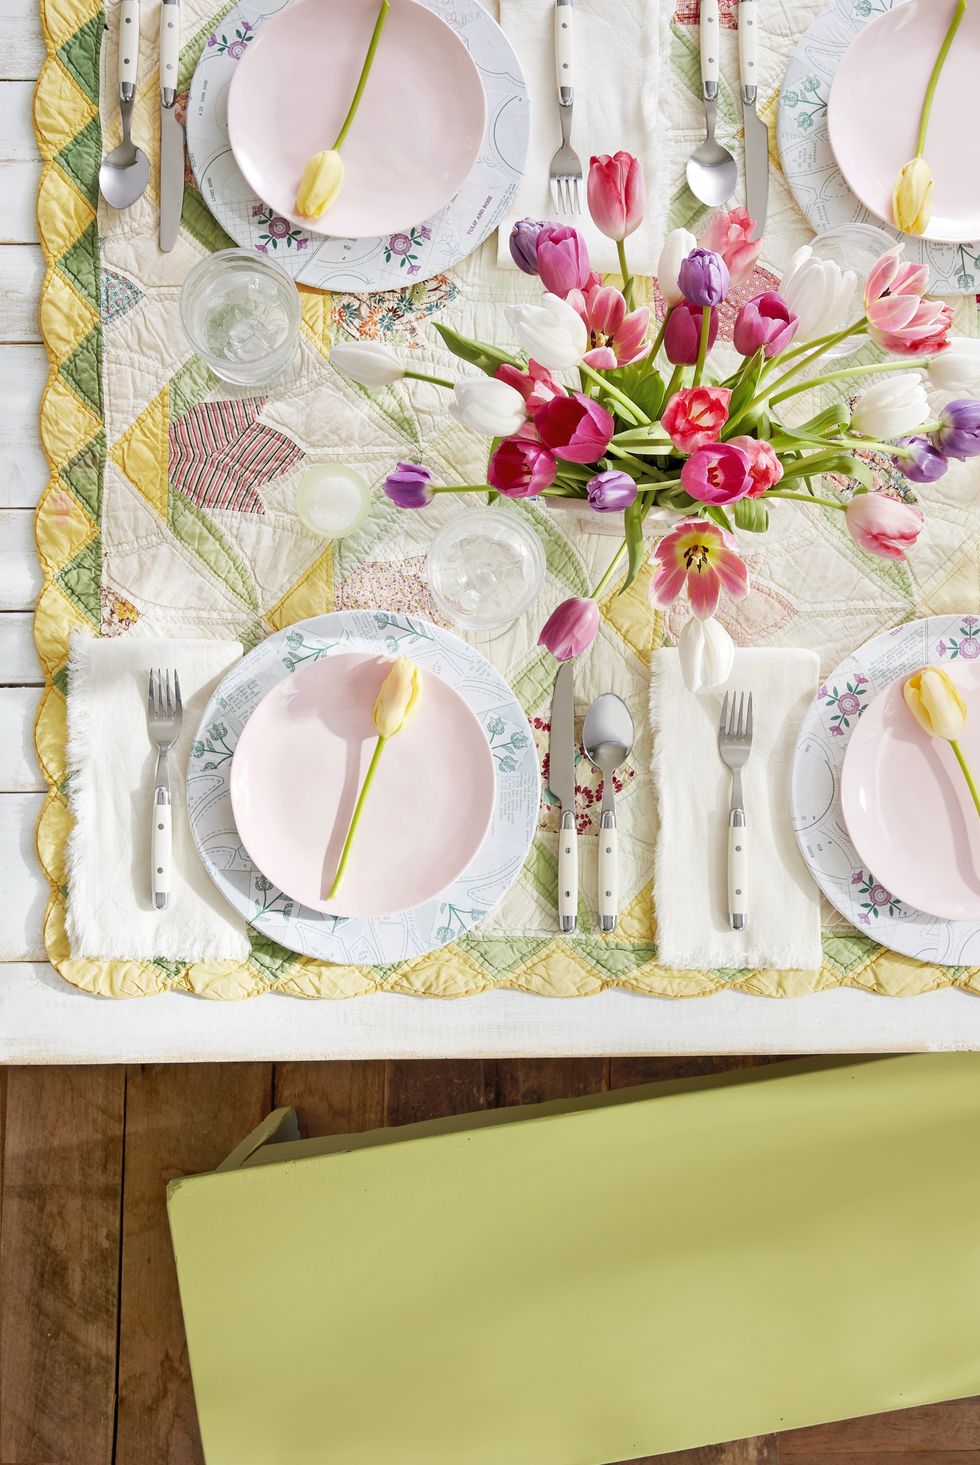 https://hips.hearstapps.com/hmg-prod/images/quilt-tablecloth-rustic-bridal-shower-idea-1553103746.jpg?crop=0.791xw:1.00xh;0.107xw,0&resize=980:*